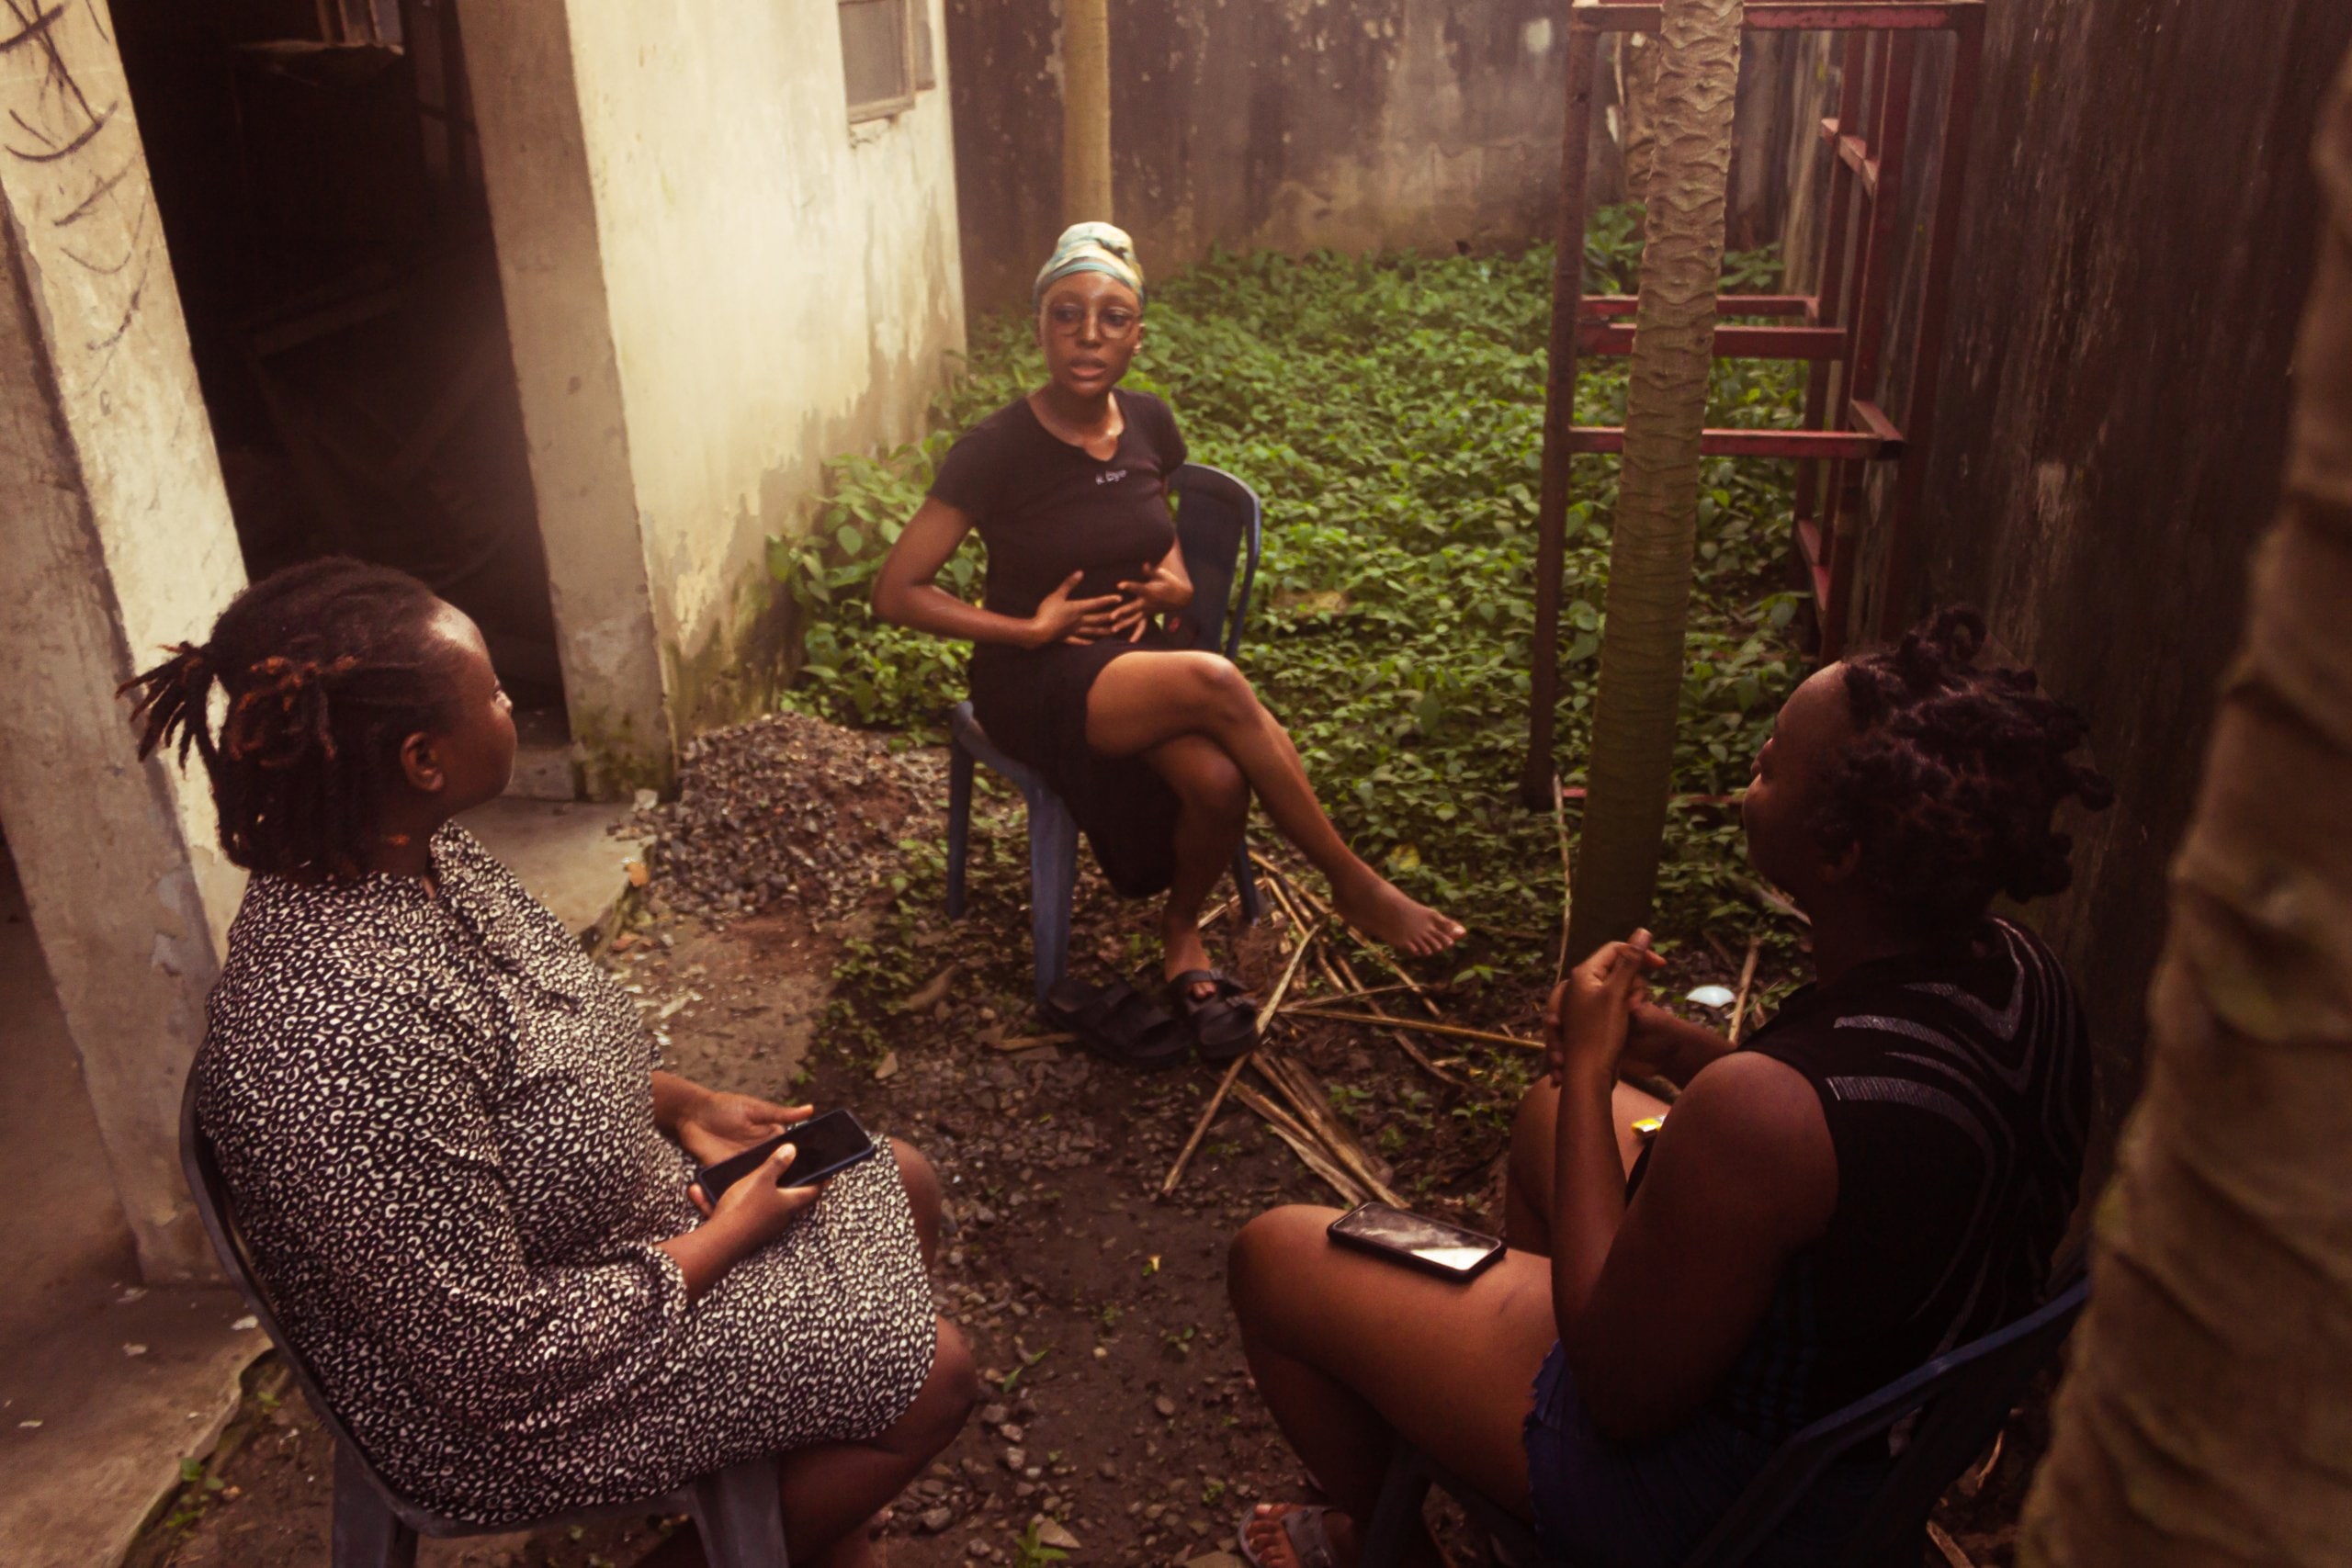 Ife and two women sits outside in the backyard.